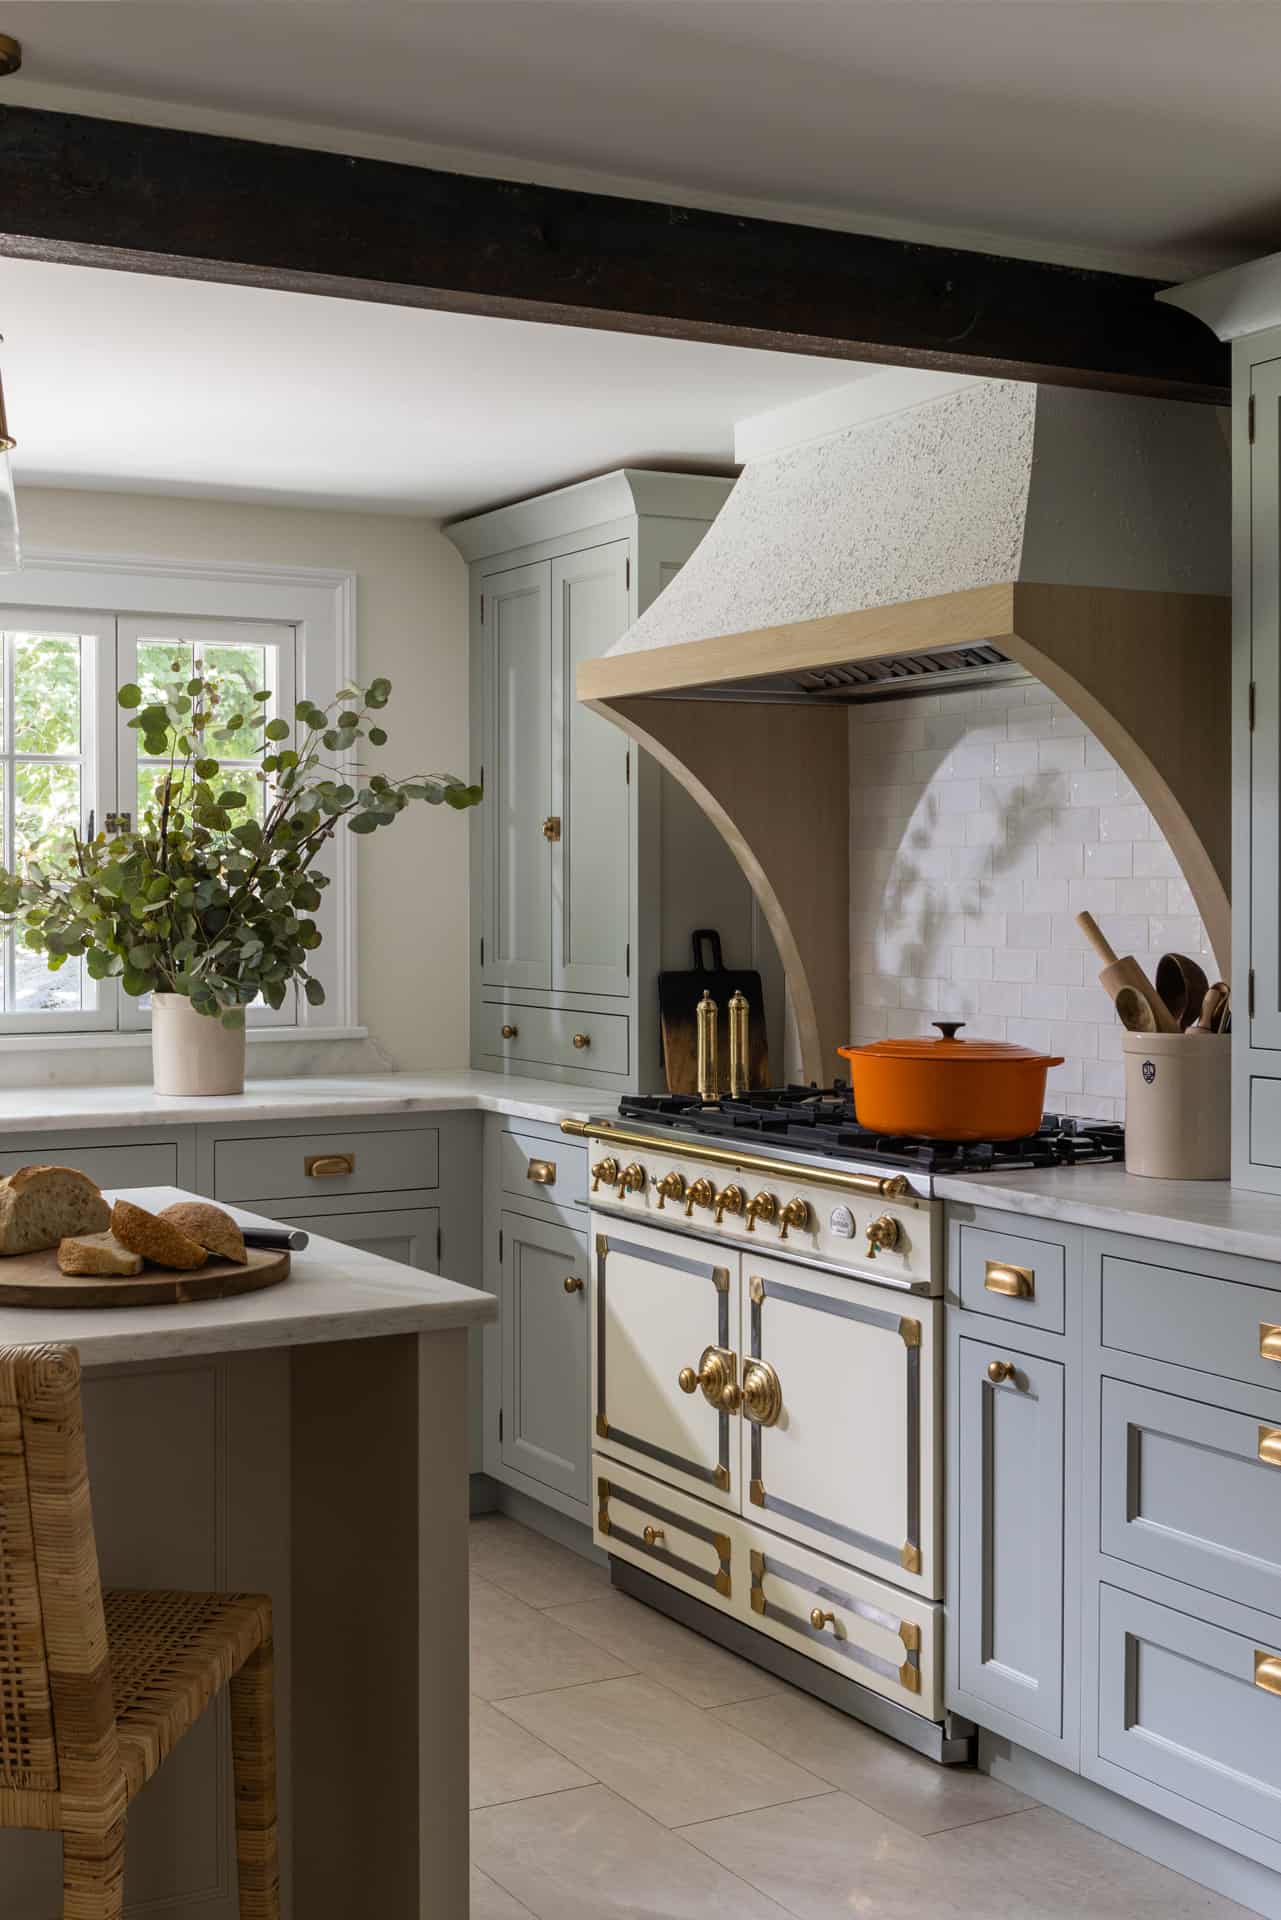 Traditional kitchen with inset Bilotta cabinetry in a mix of Farrow & Ball light blue and natural cream. Counter tops are Danby marble with La Cornue range and oak accents.